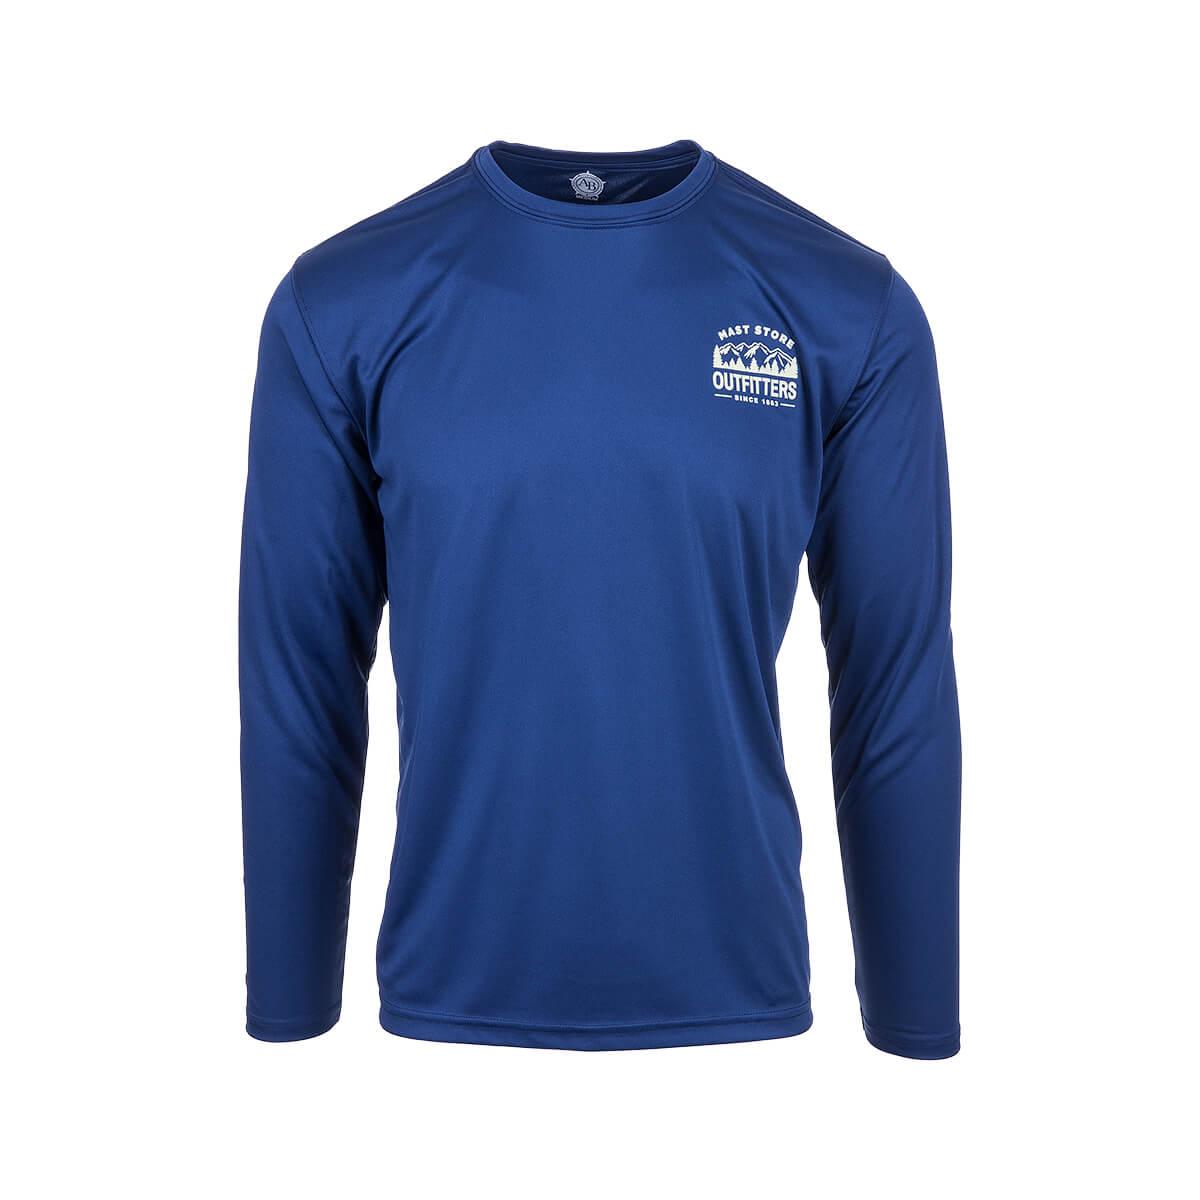 Mast General Store | Mast Store Outfitters Solar Long Sleeve Wicking T ...